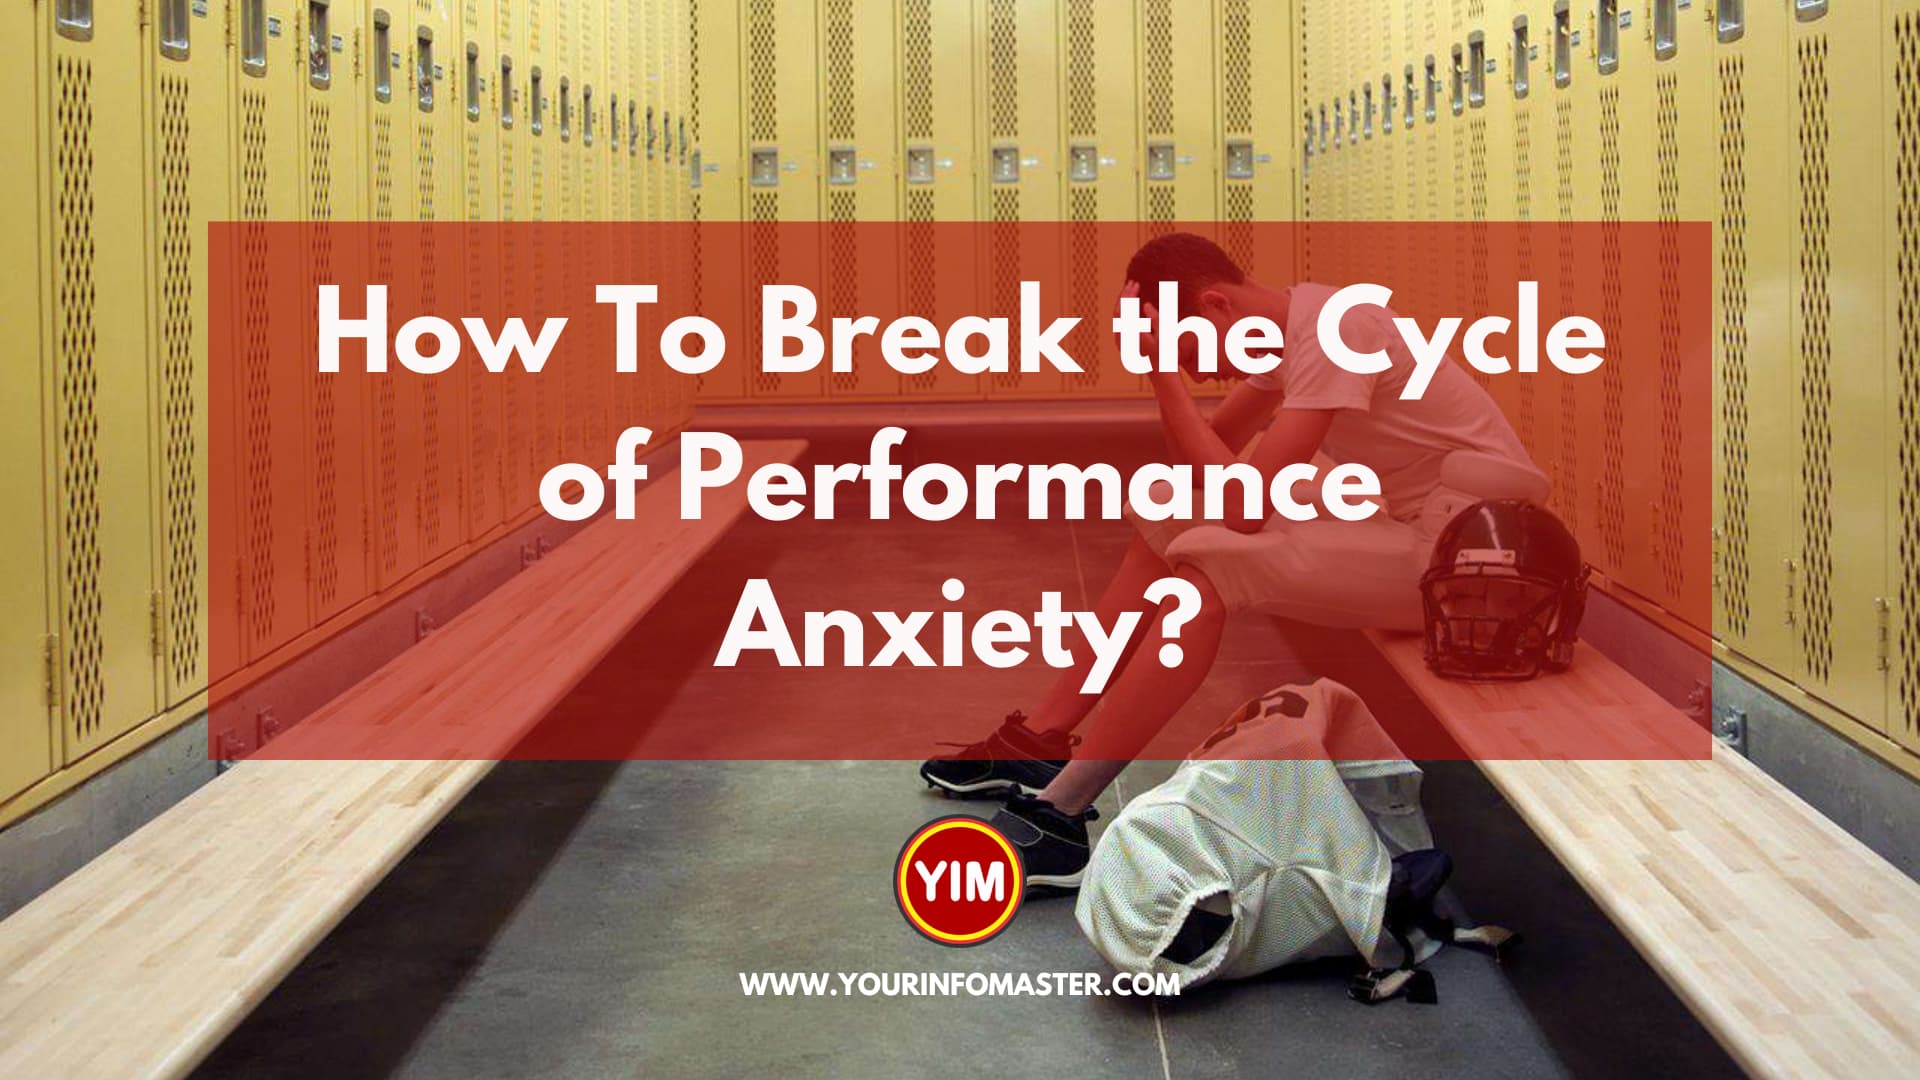 How To Break the Cycle of Performance Anxiety